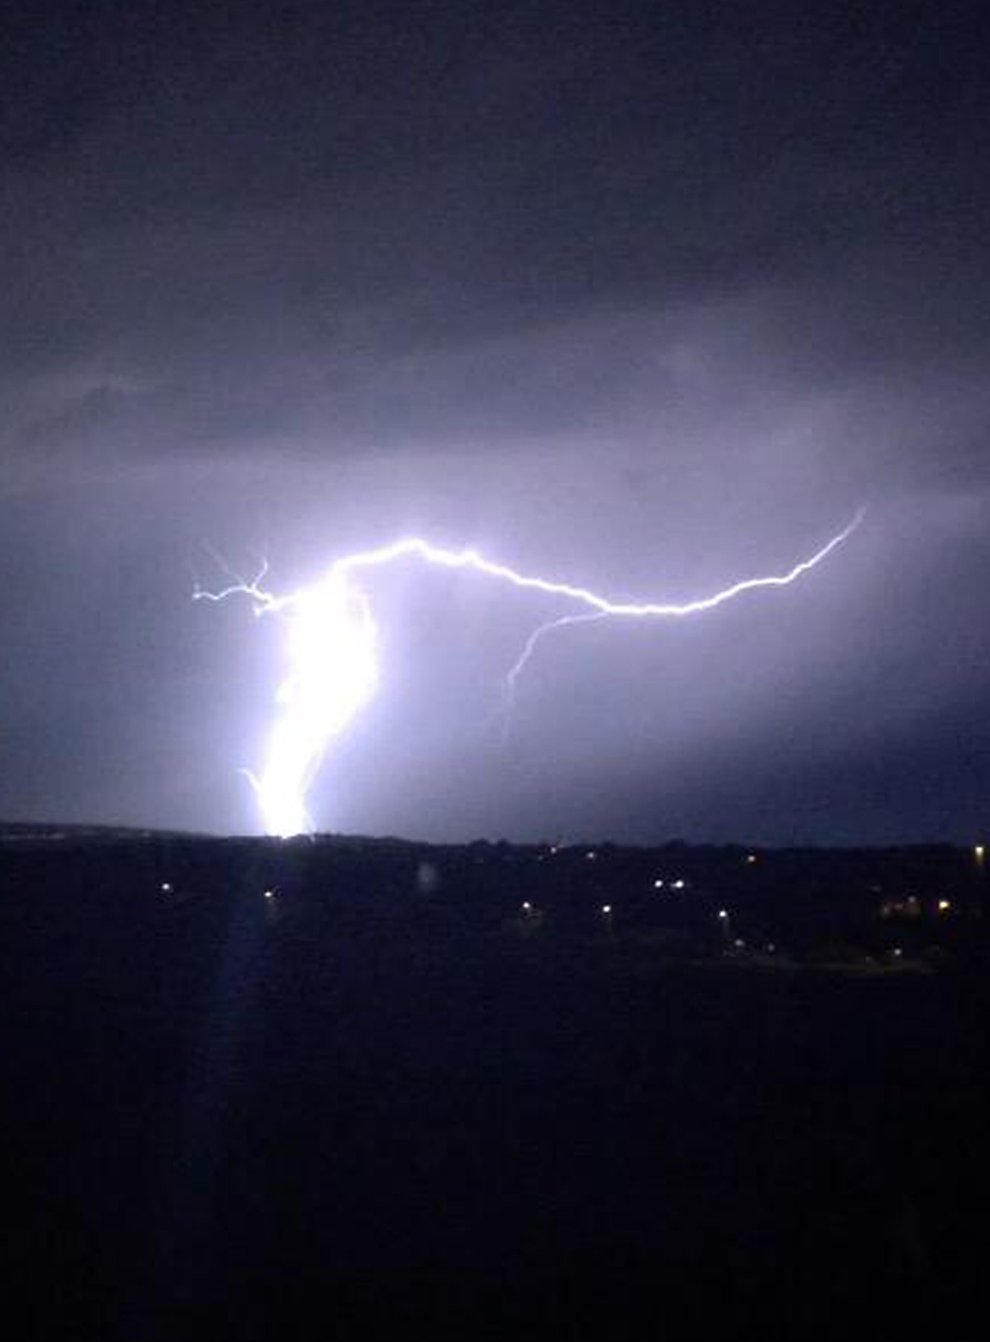 Thunderstorms are set to sweep across much of southern England on Thursday amid fears that roads, homes and businesses could be flooded (Laura Clays/PA)